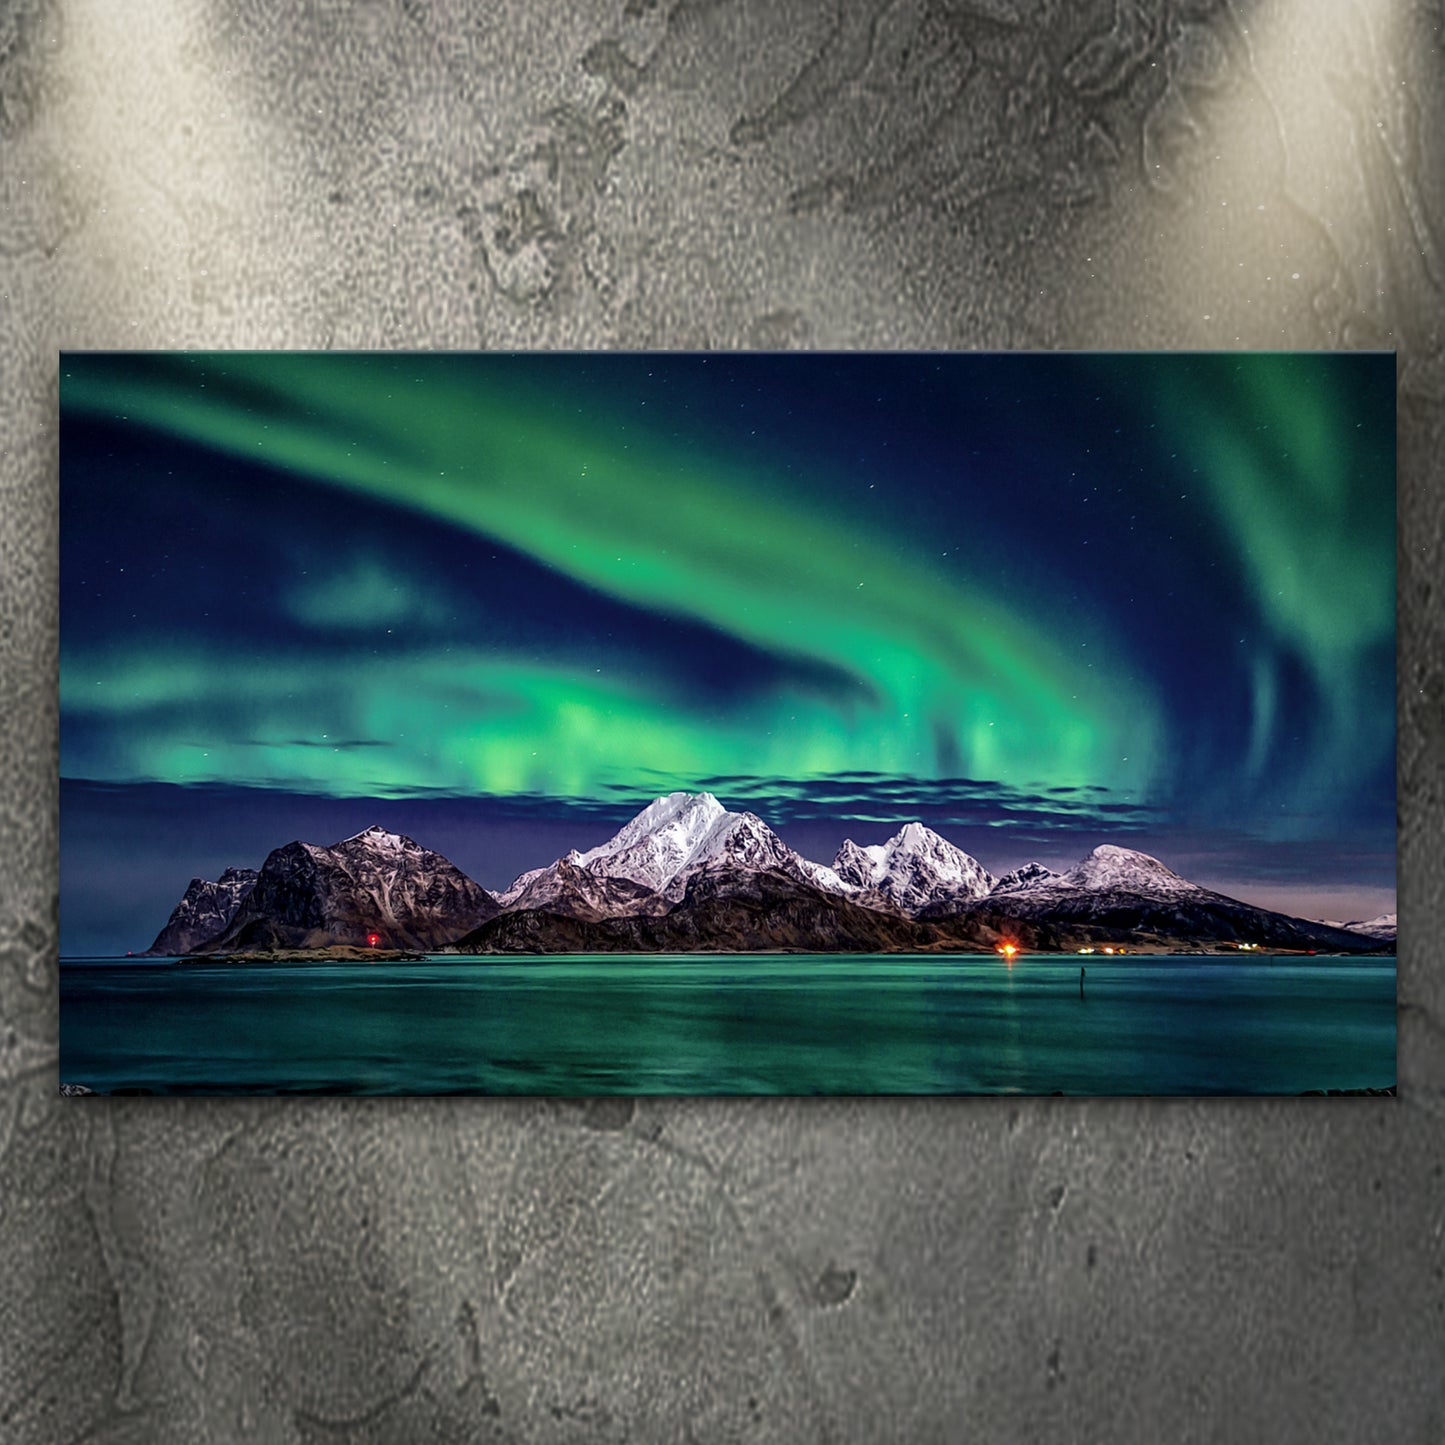 Lake And Northern Lights Canvas Wall Art - Image by Tailored Canvases